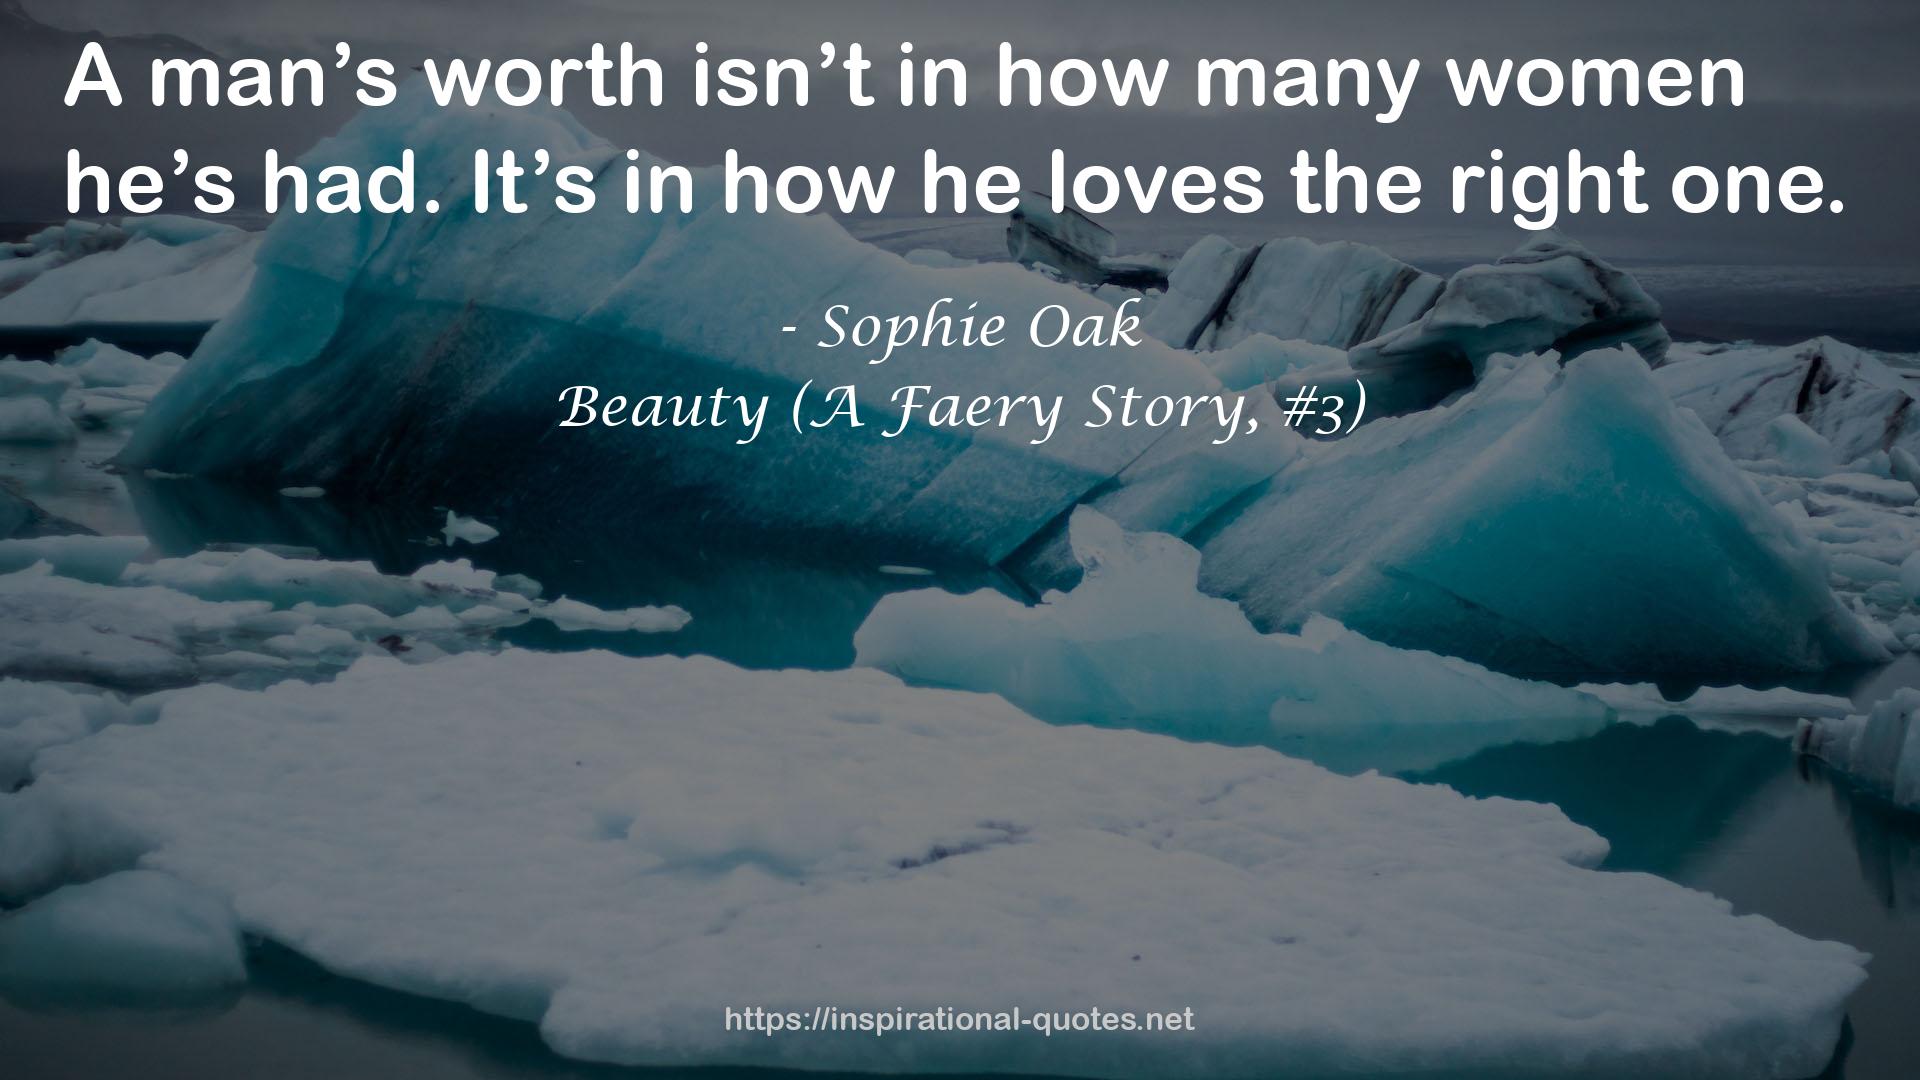 Beauty (A Faery Story, #3) QUOTES